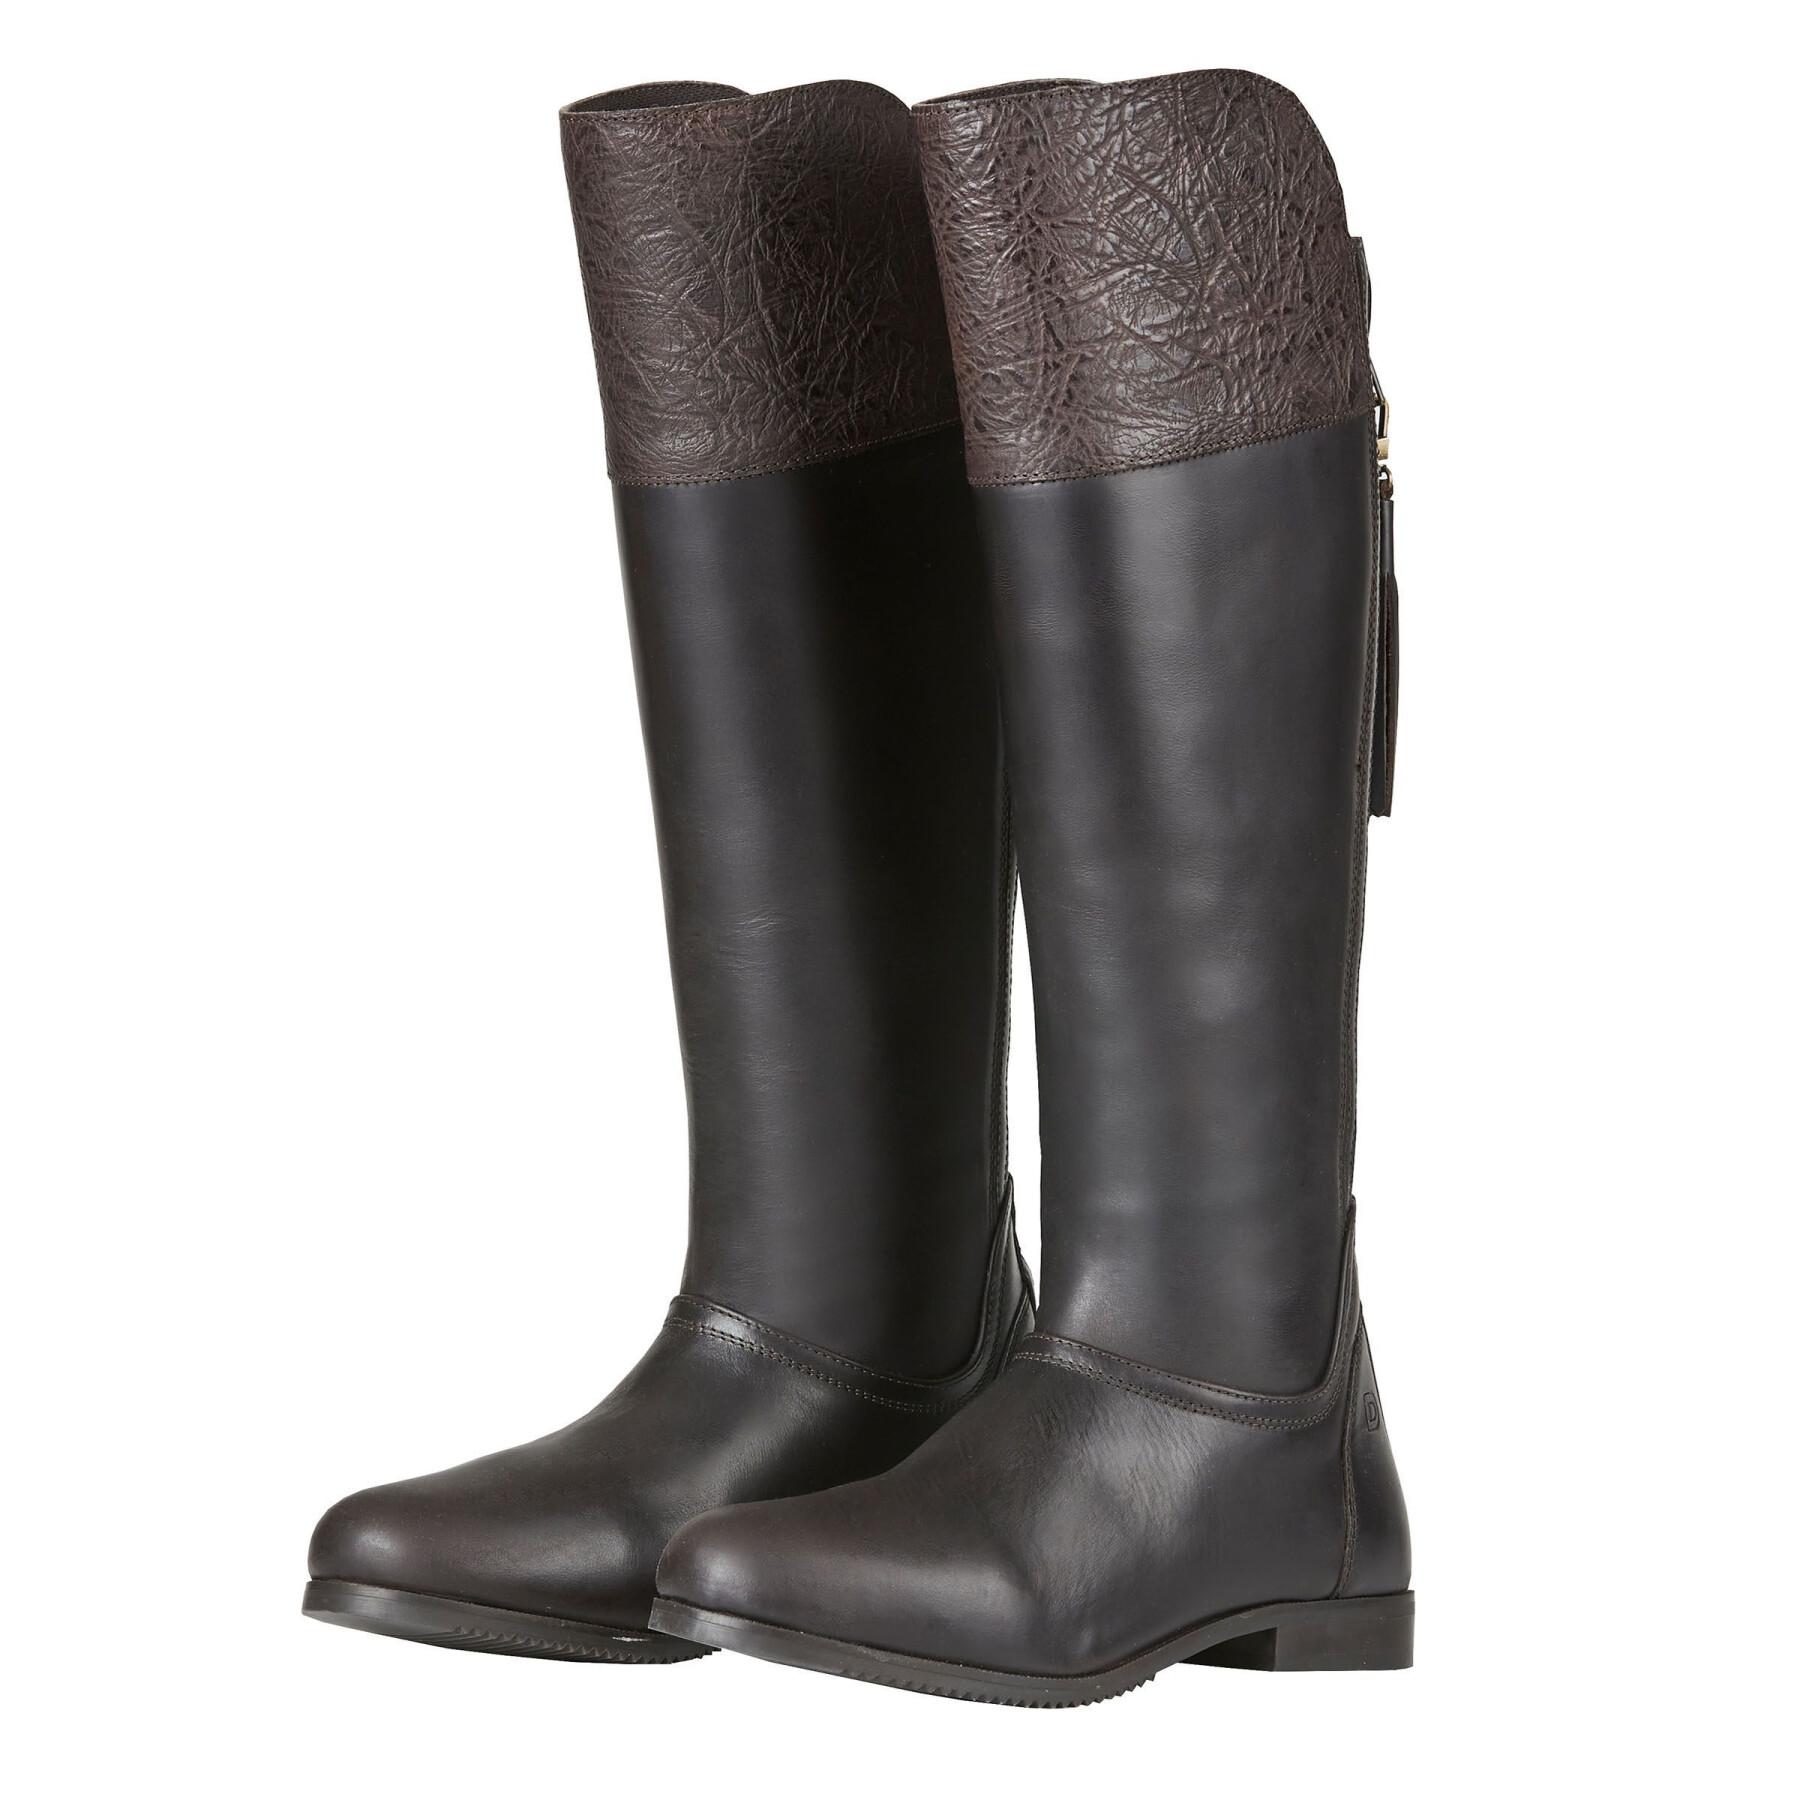 Riding boots Dublin Nore